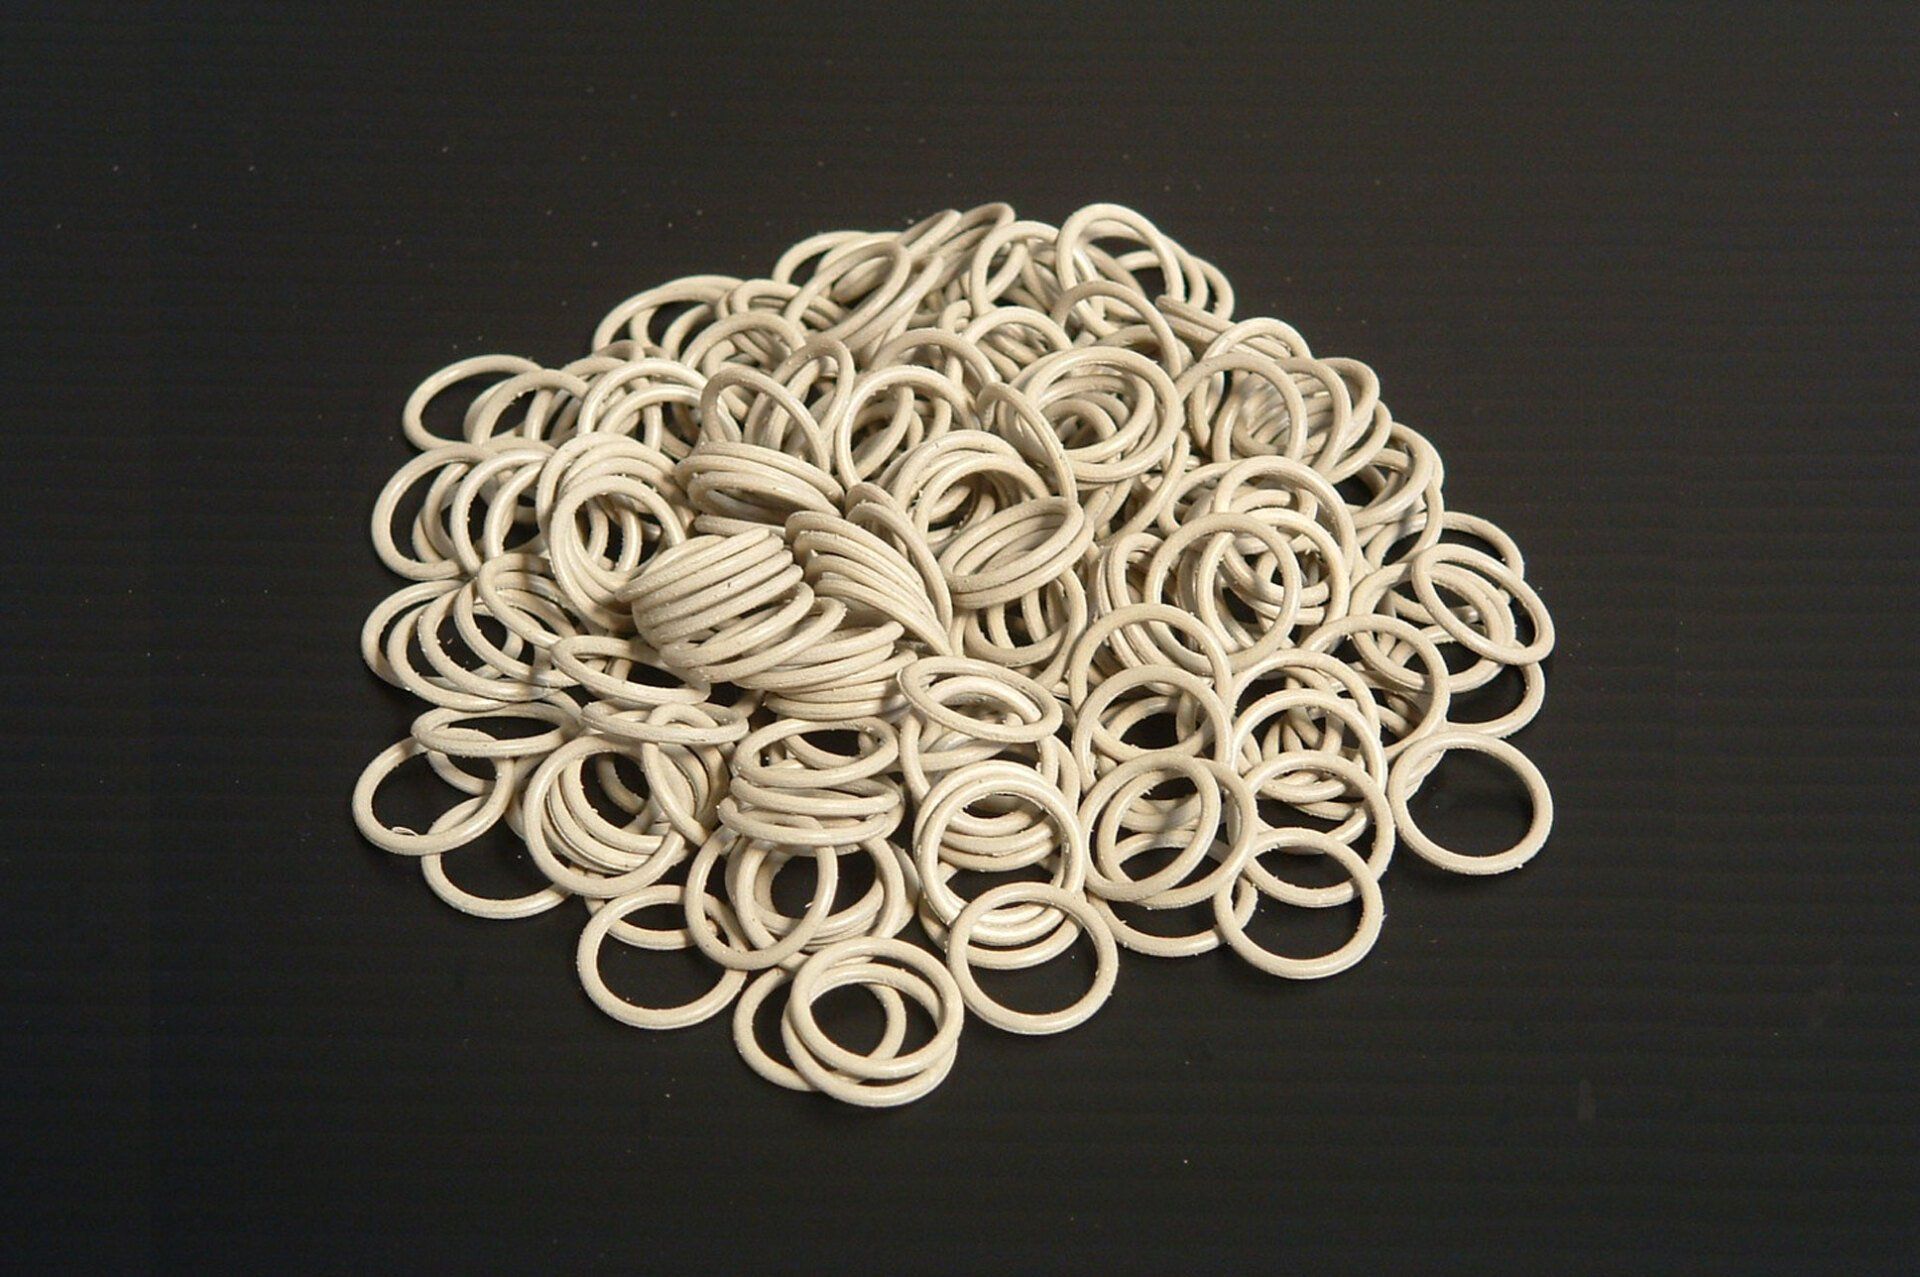 Moulded gaskets,  Custom moulded,  Moulded o-rings,  TC Shielding,  TCS,  Conductive elastomer specialists,  Herefordshire,  conductive silicone manufacturers,